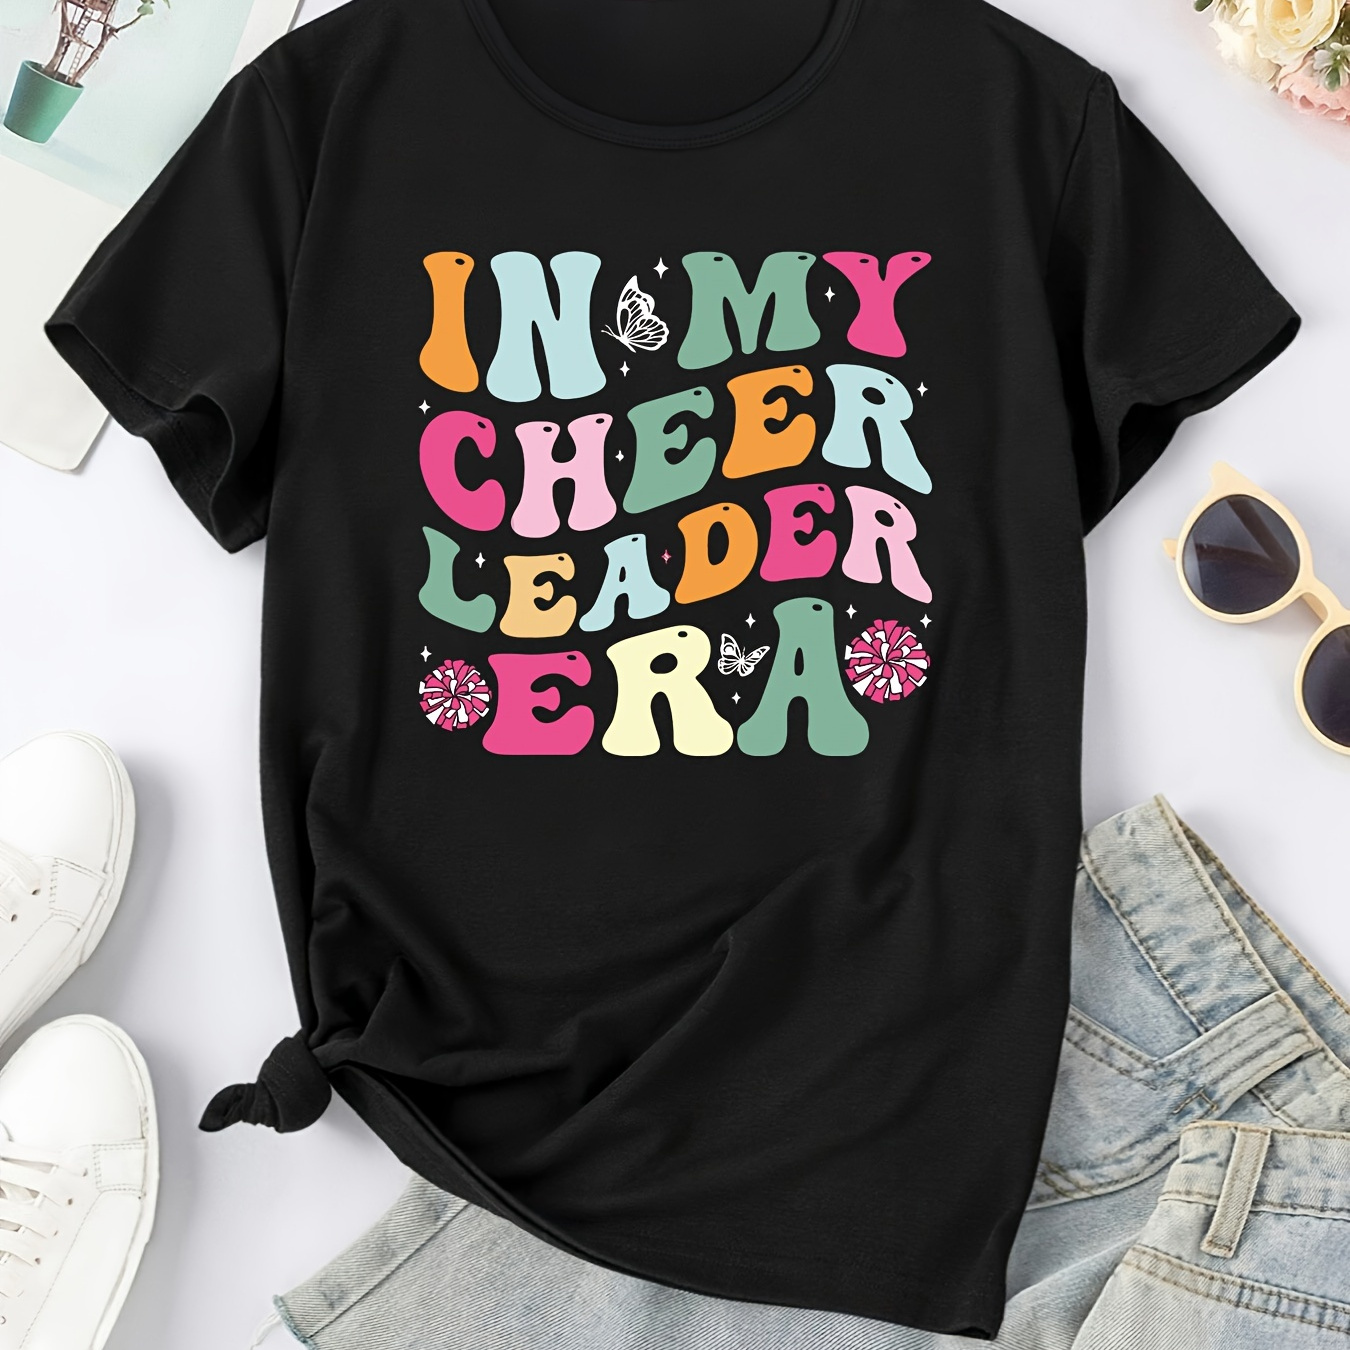 

Cheer Leader Print Crew Neck T-shirt, Short Sleeve Casual Top For Summer & Spring, Women's Clothing